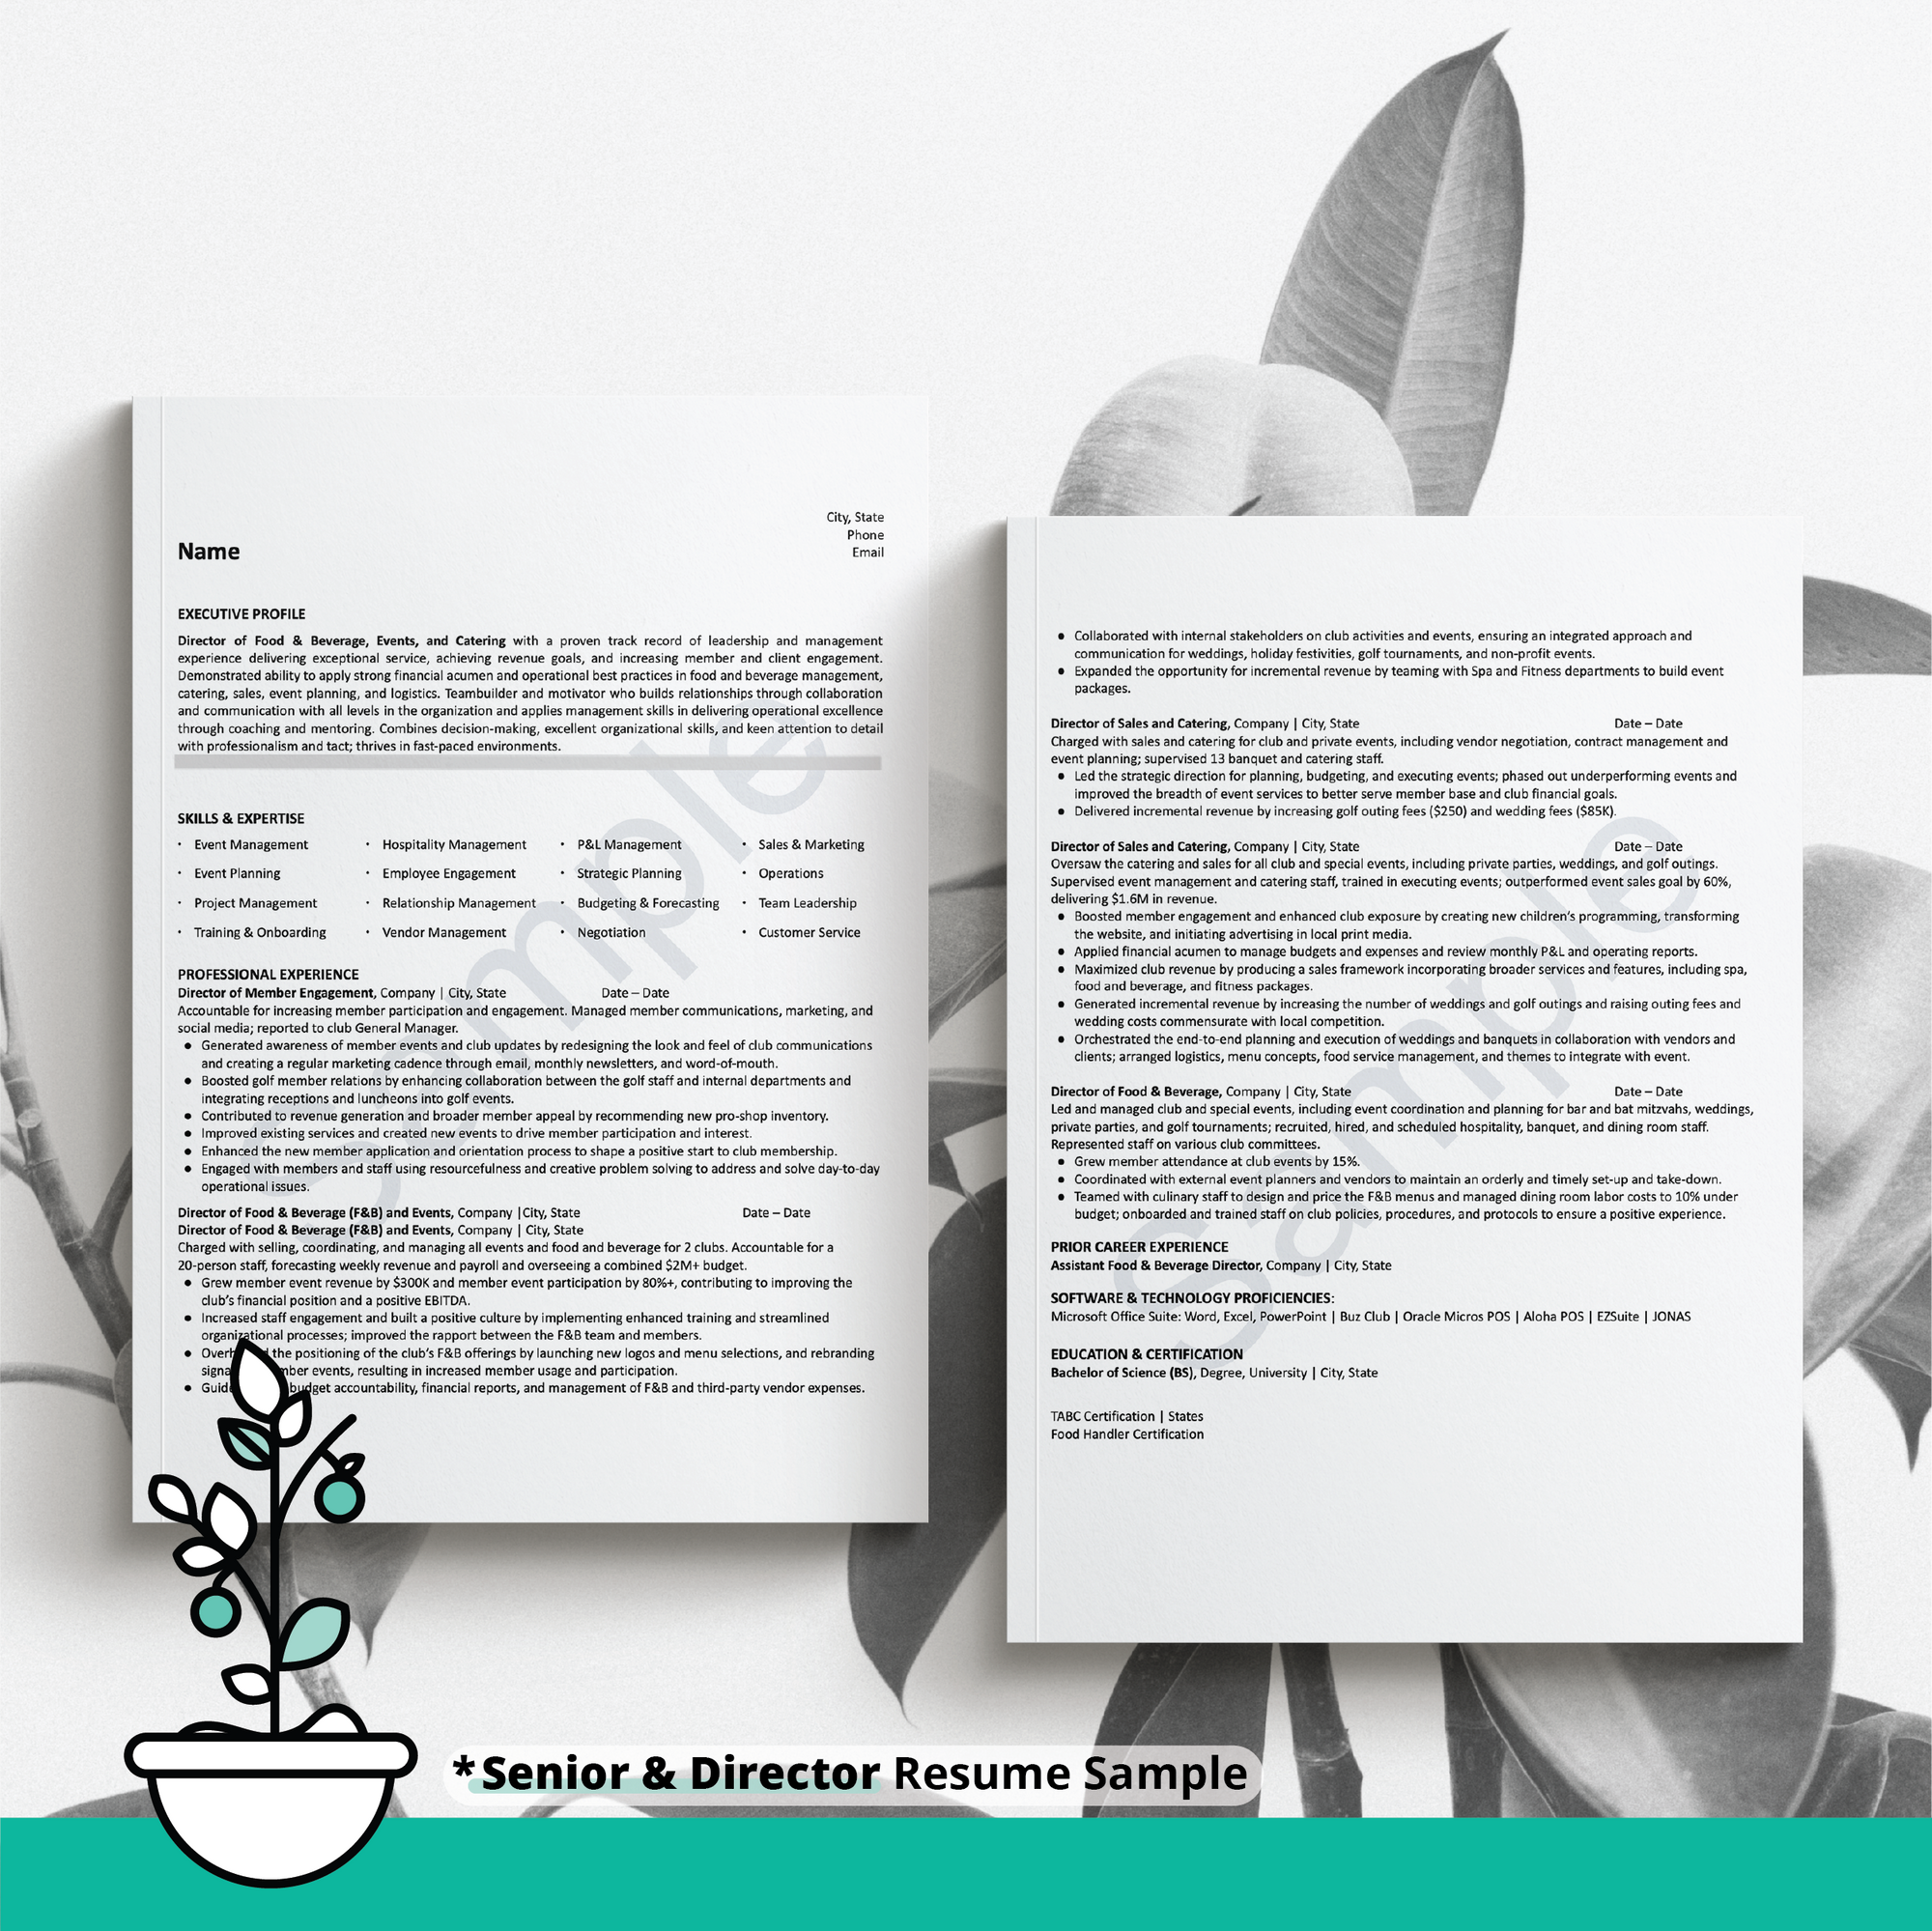 2 pages displaying a senior/director level resume on a black and white background with botanical and a teal border at the bottom